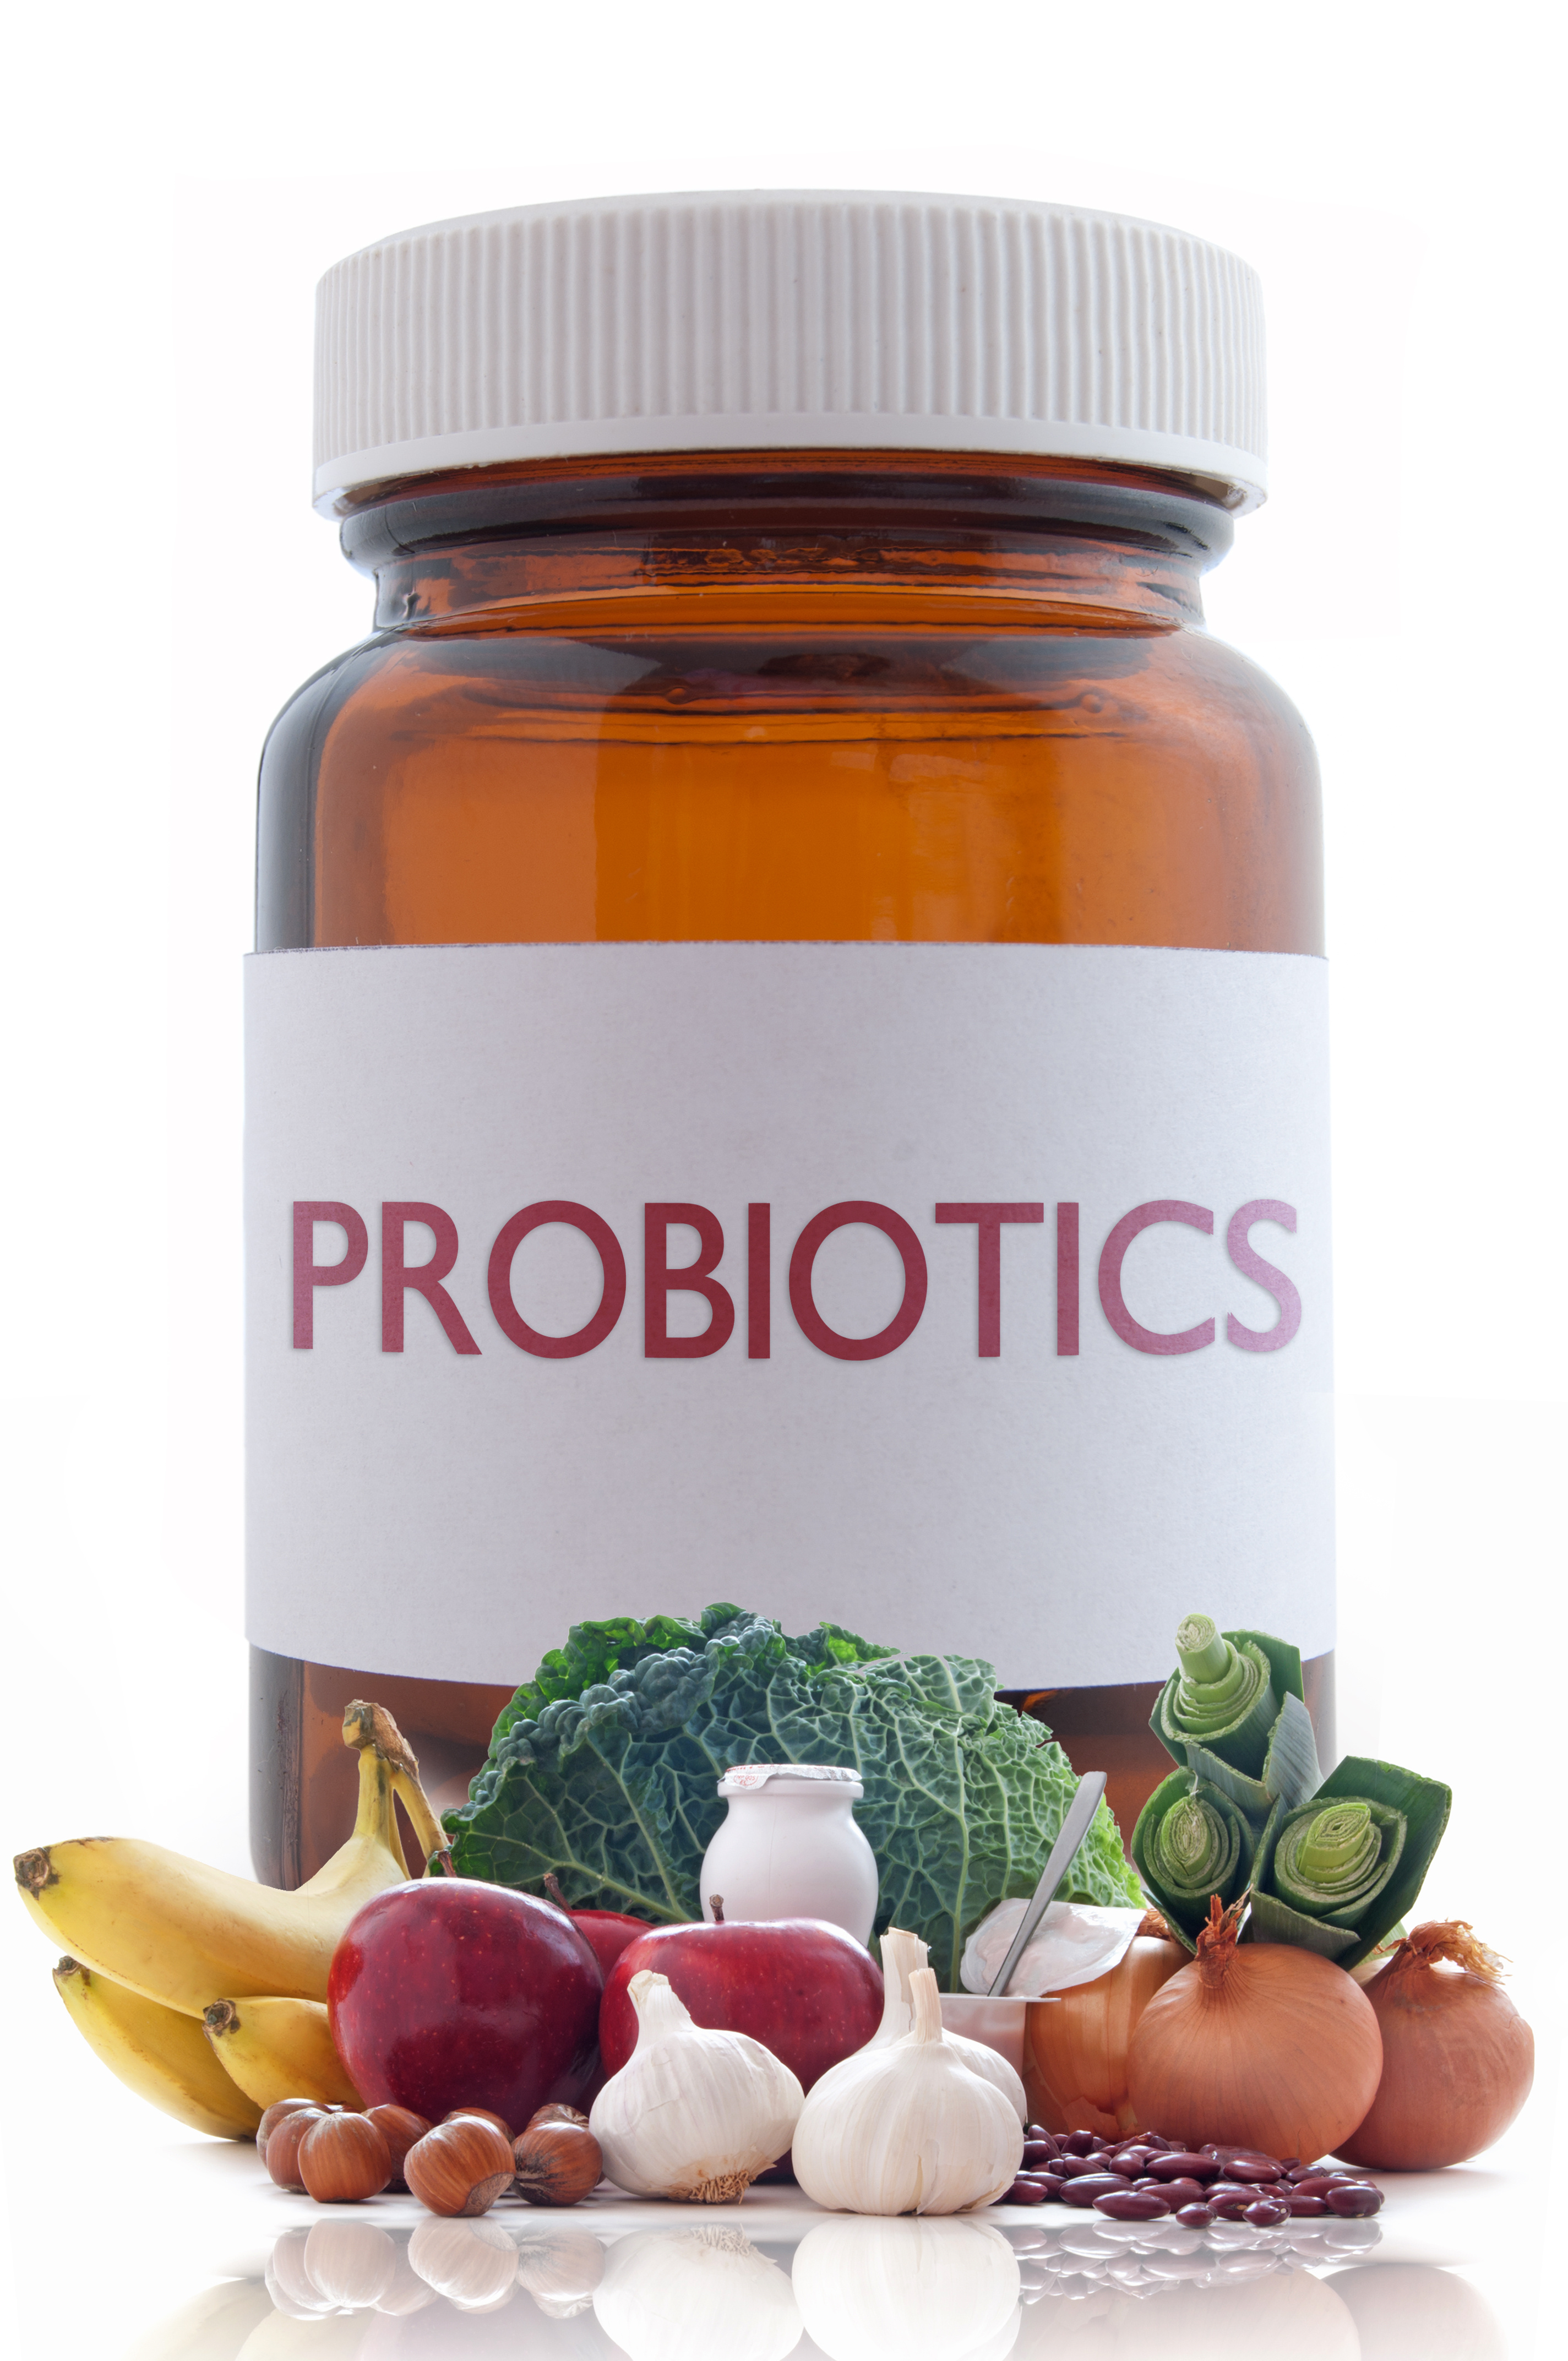 What are Probiotics and their benefits to Gut?